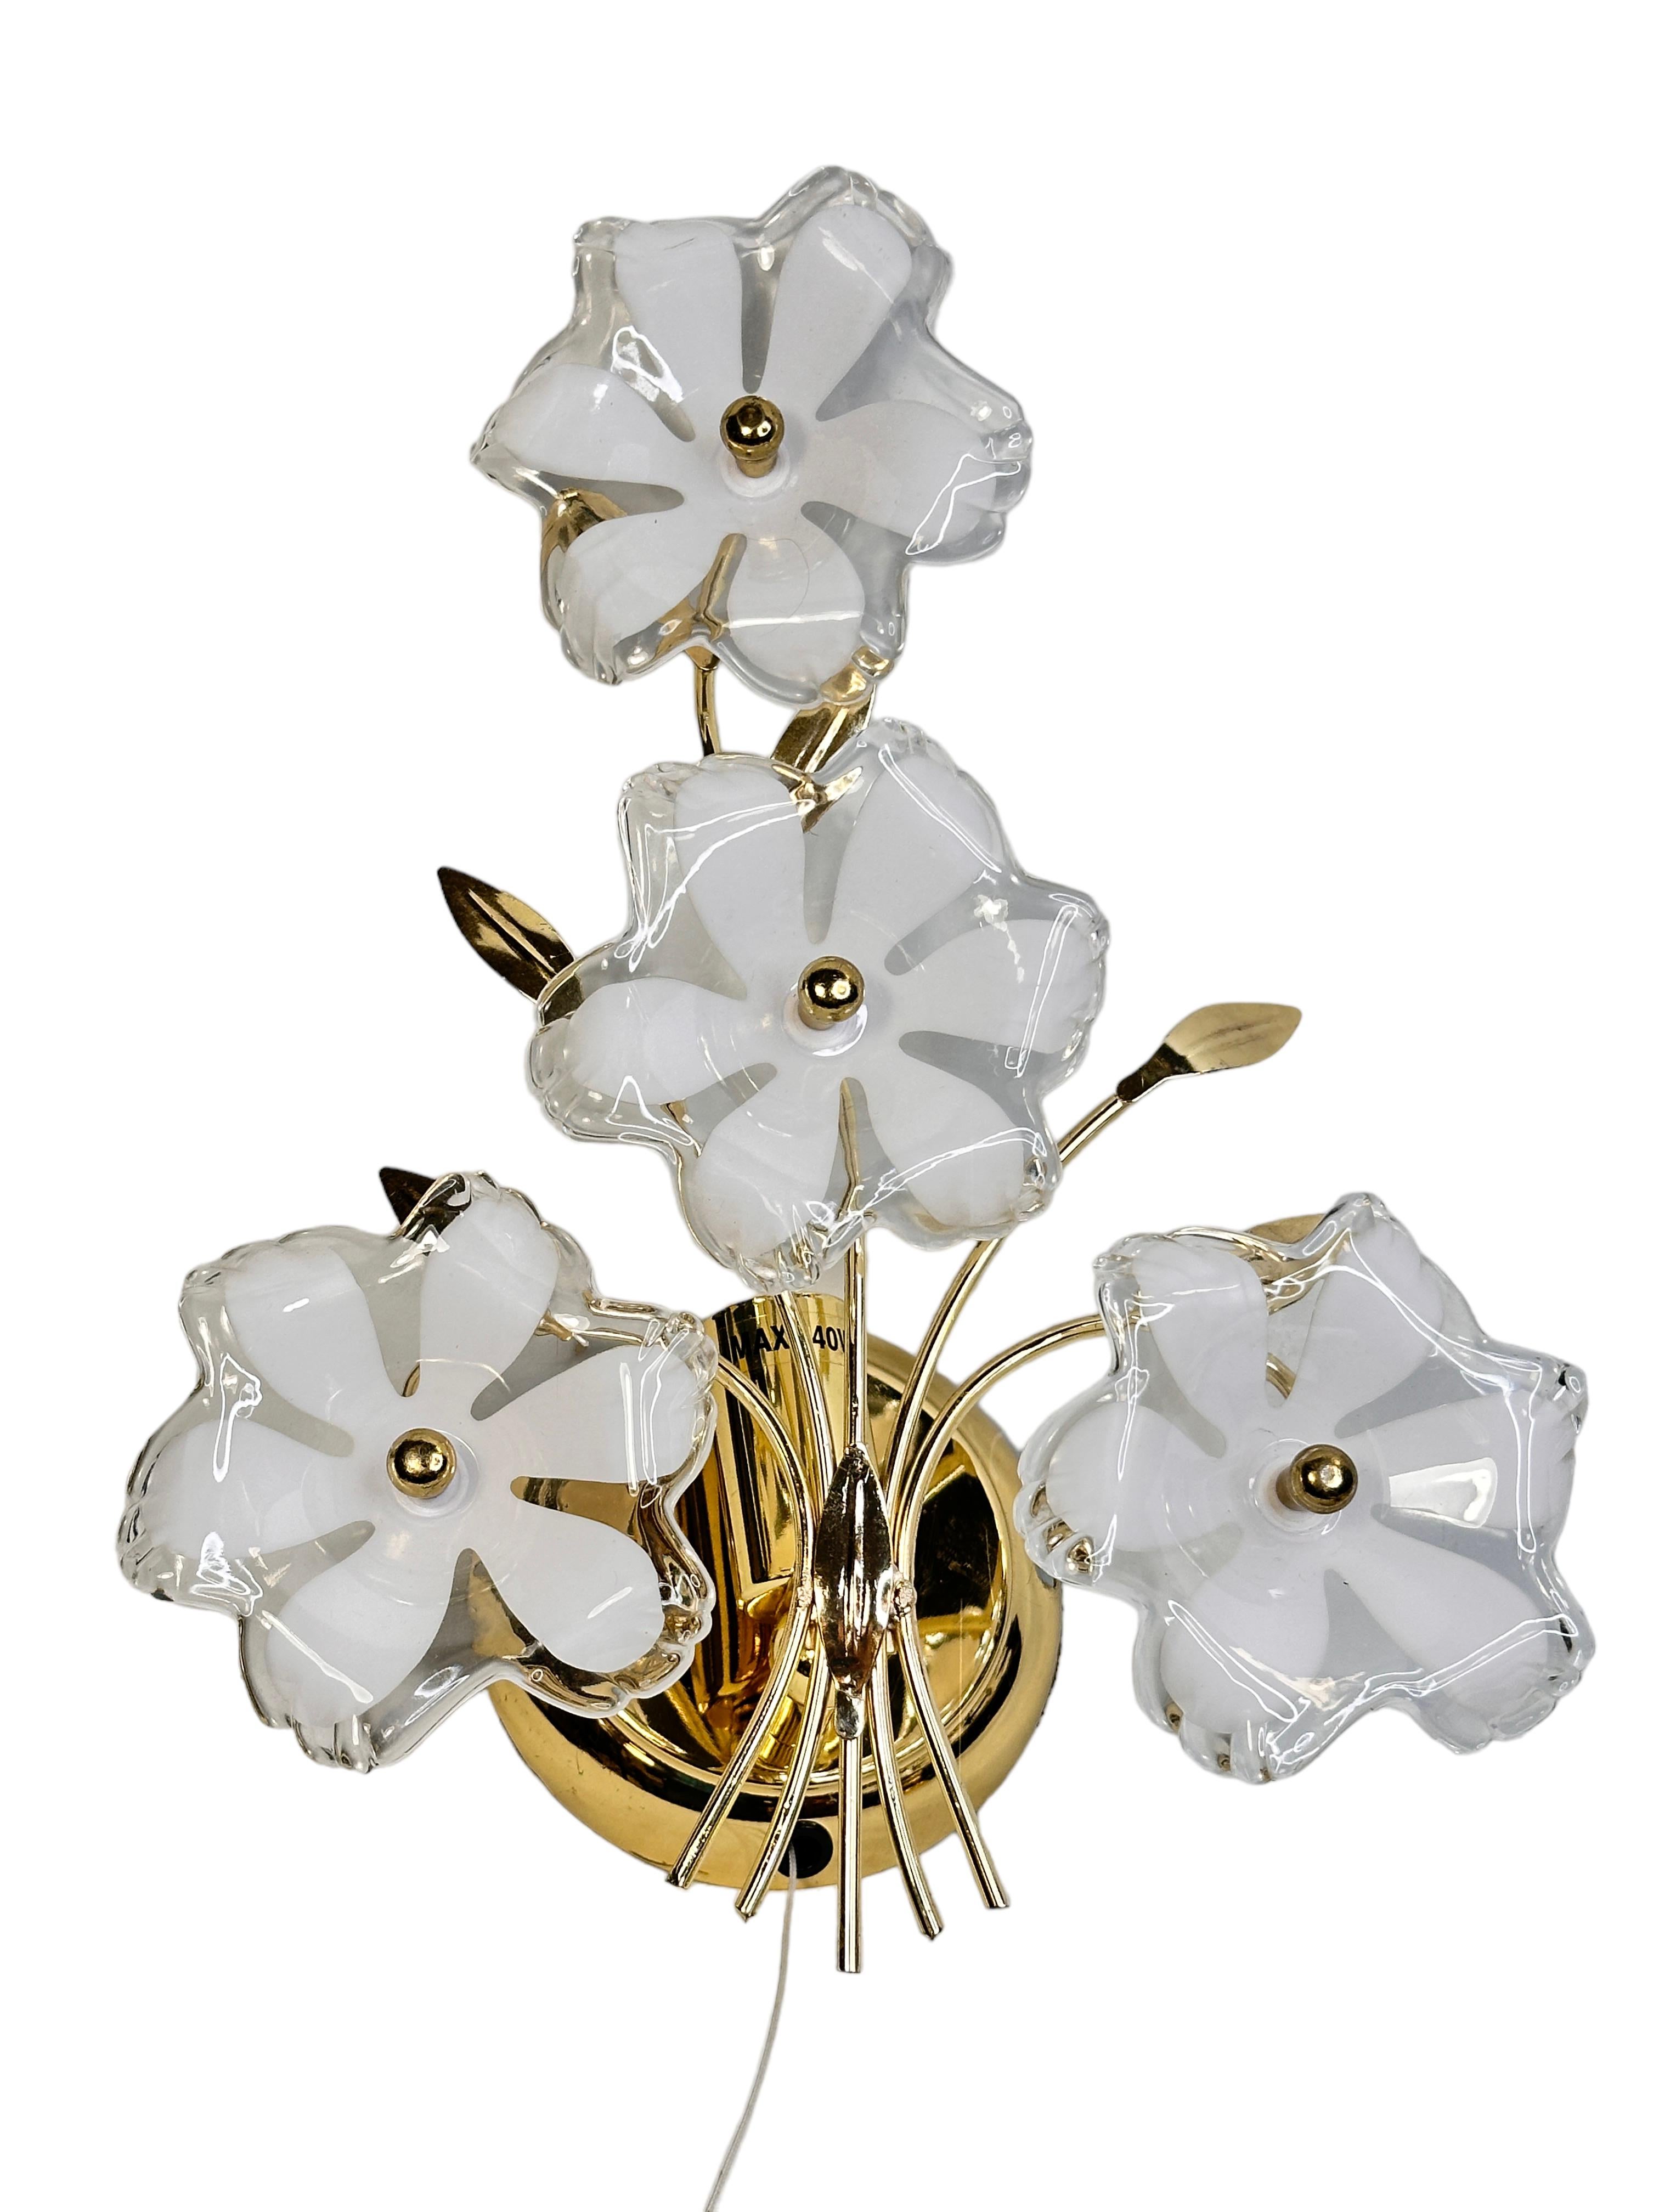 Hollywood Regency Pair of Floral Murano Sconces, Vintage Brass Wall Lights, 1970s Italy